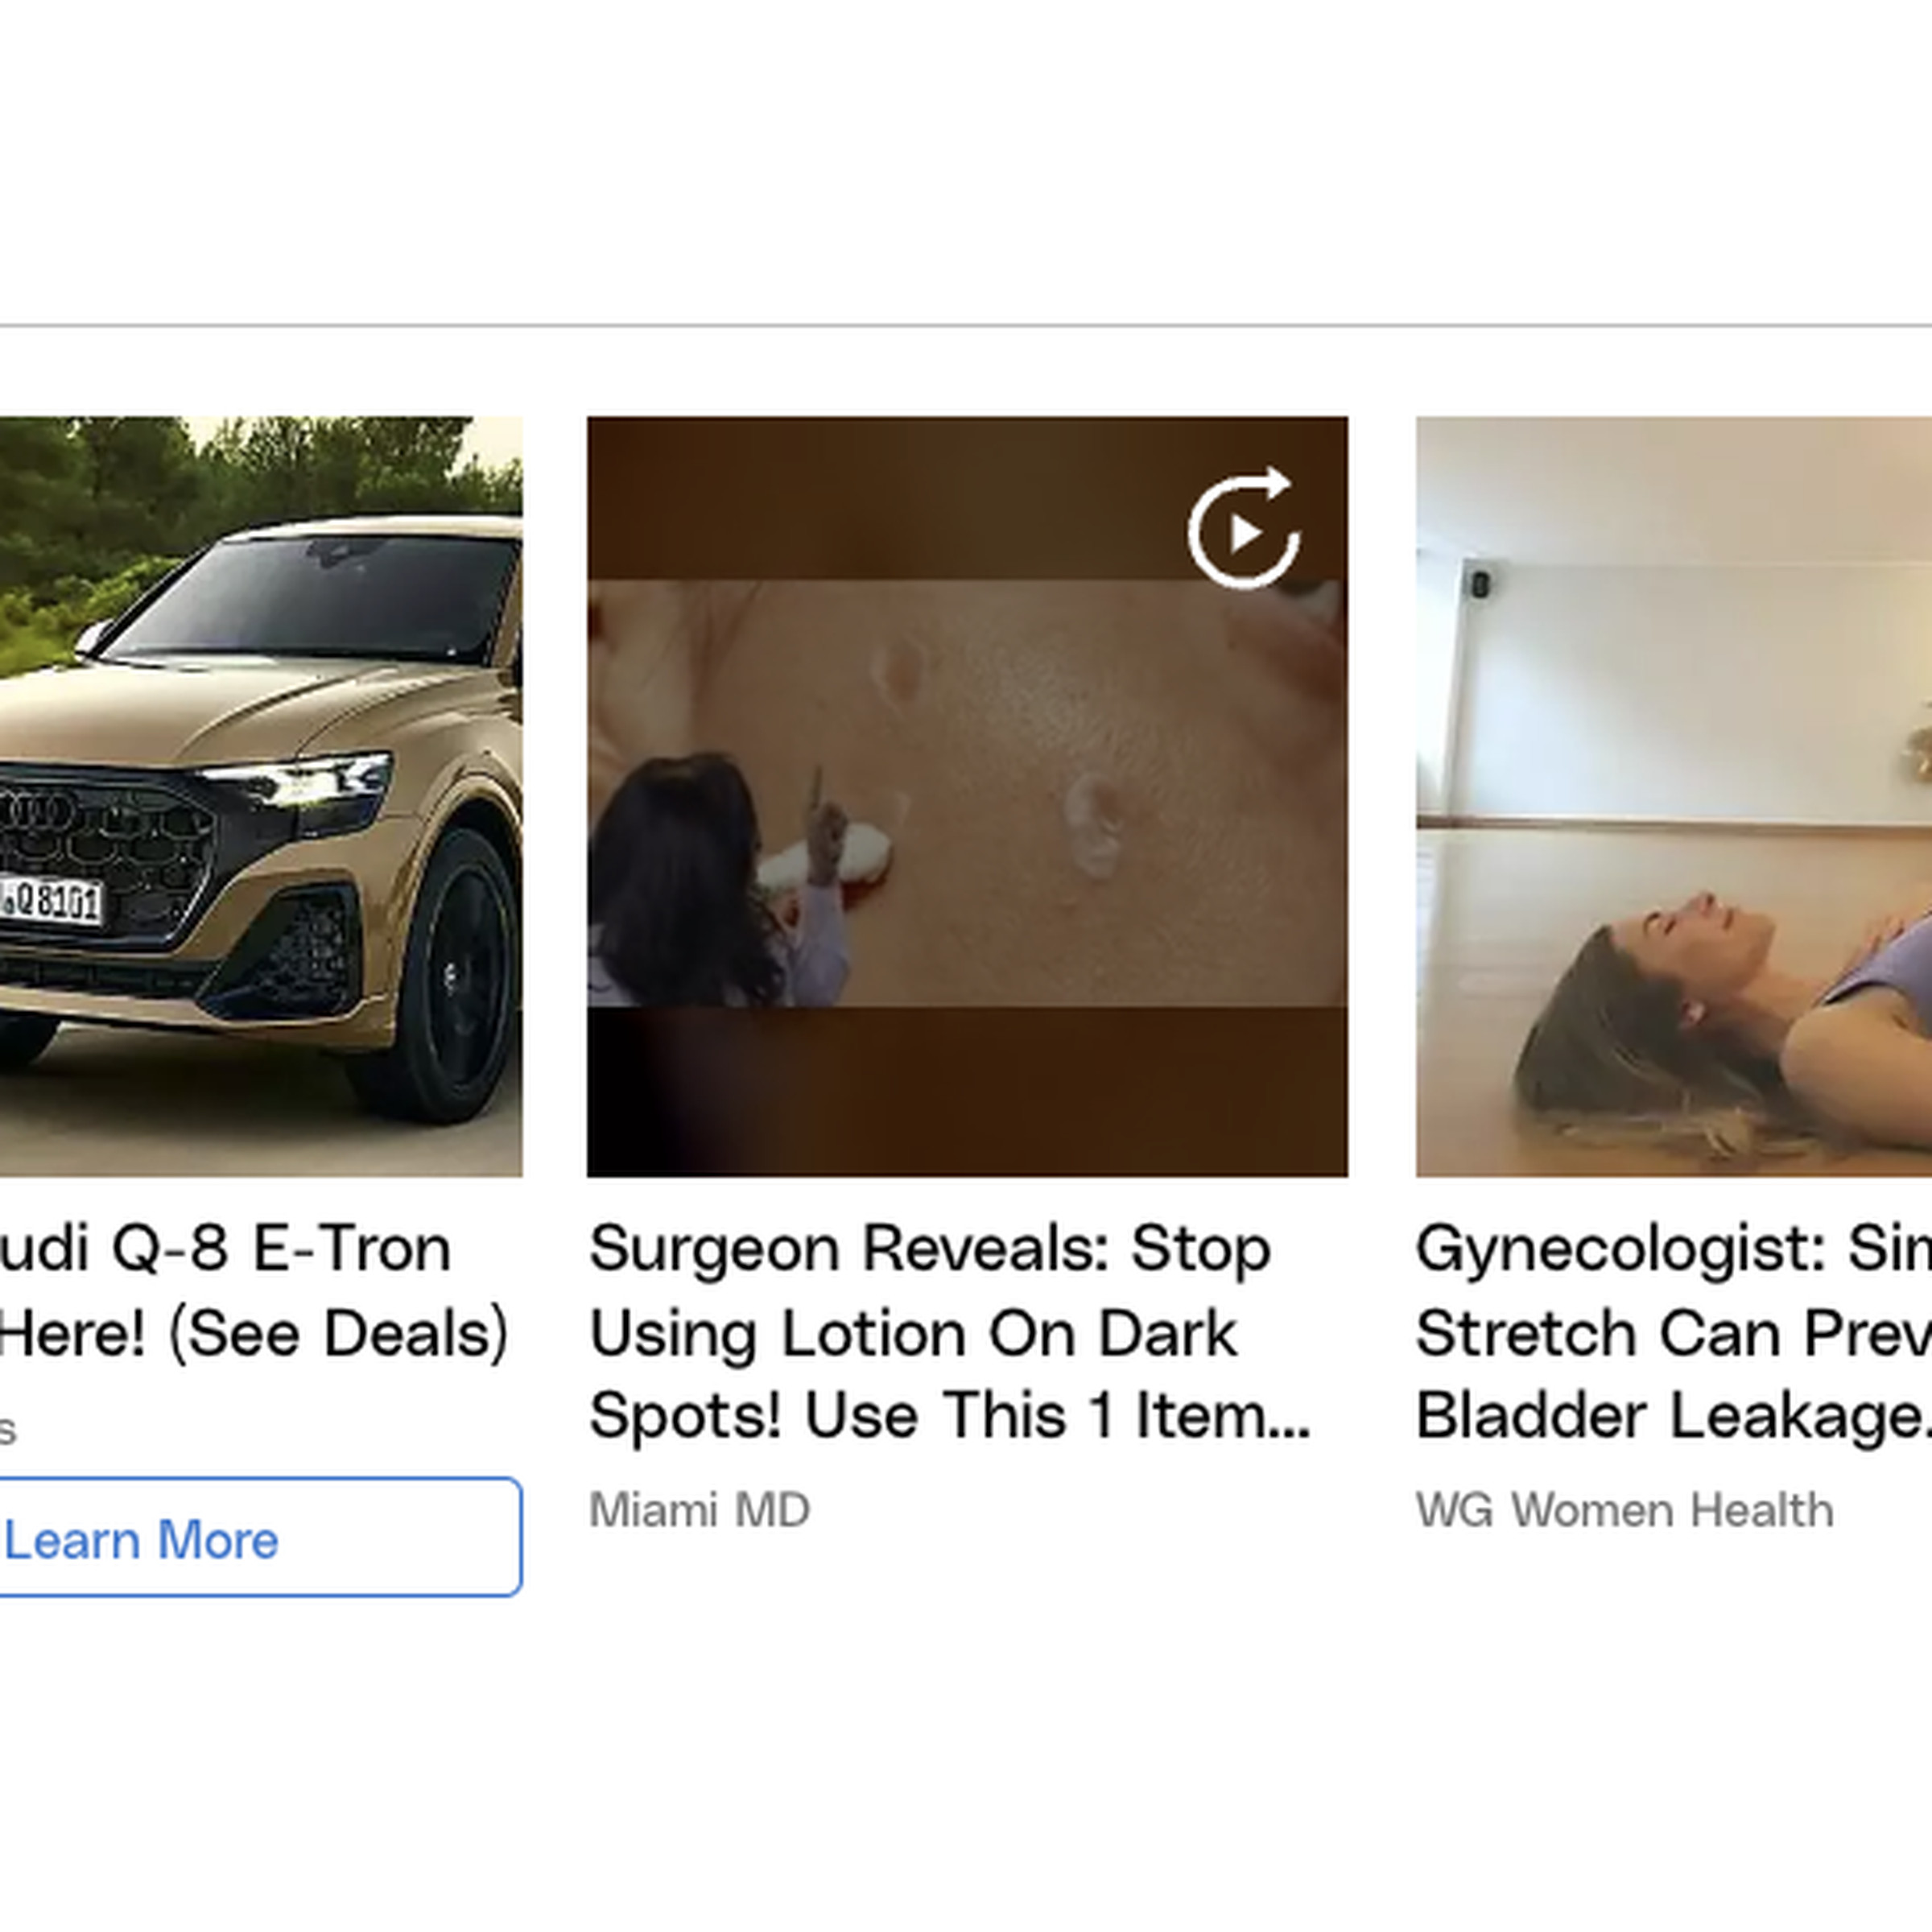 A picture of three chumbox articles, one for a car, and two featuring questionable medical claims.